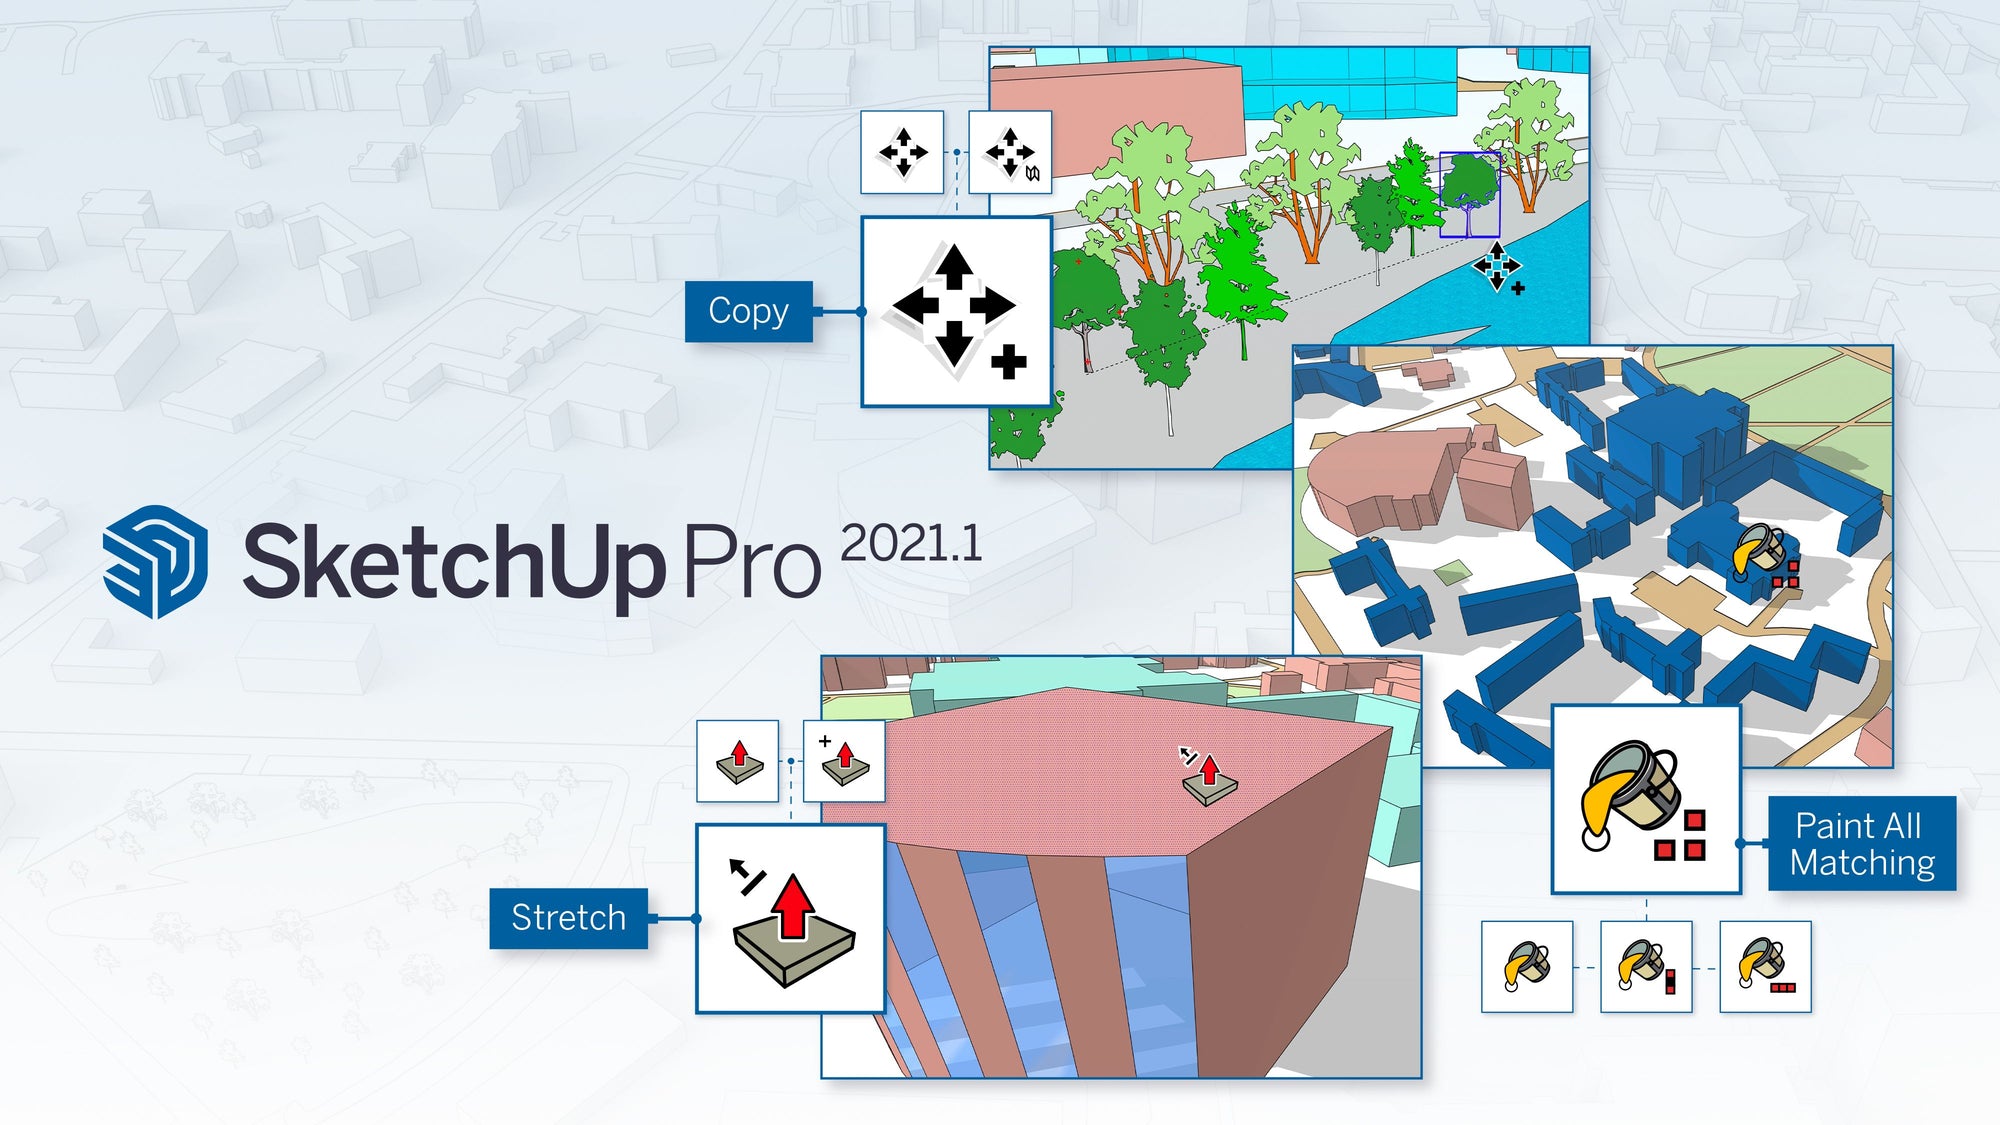 SketchUp Pro 2023 download the new for apple